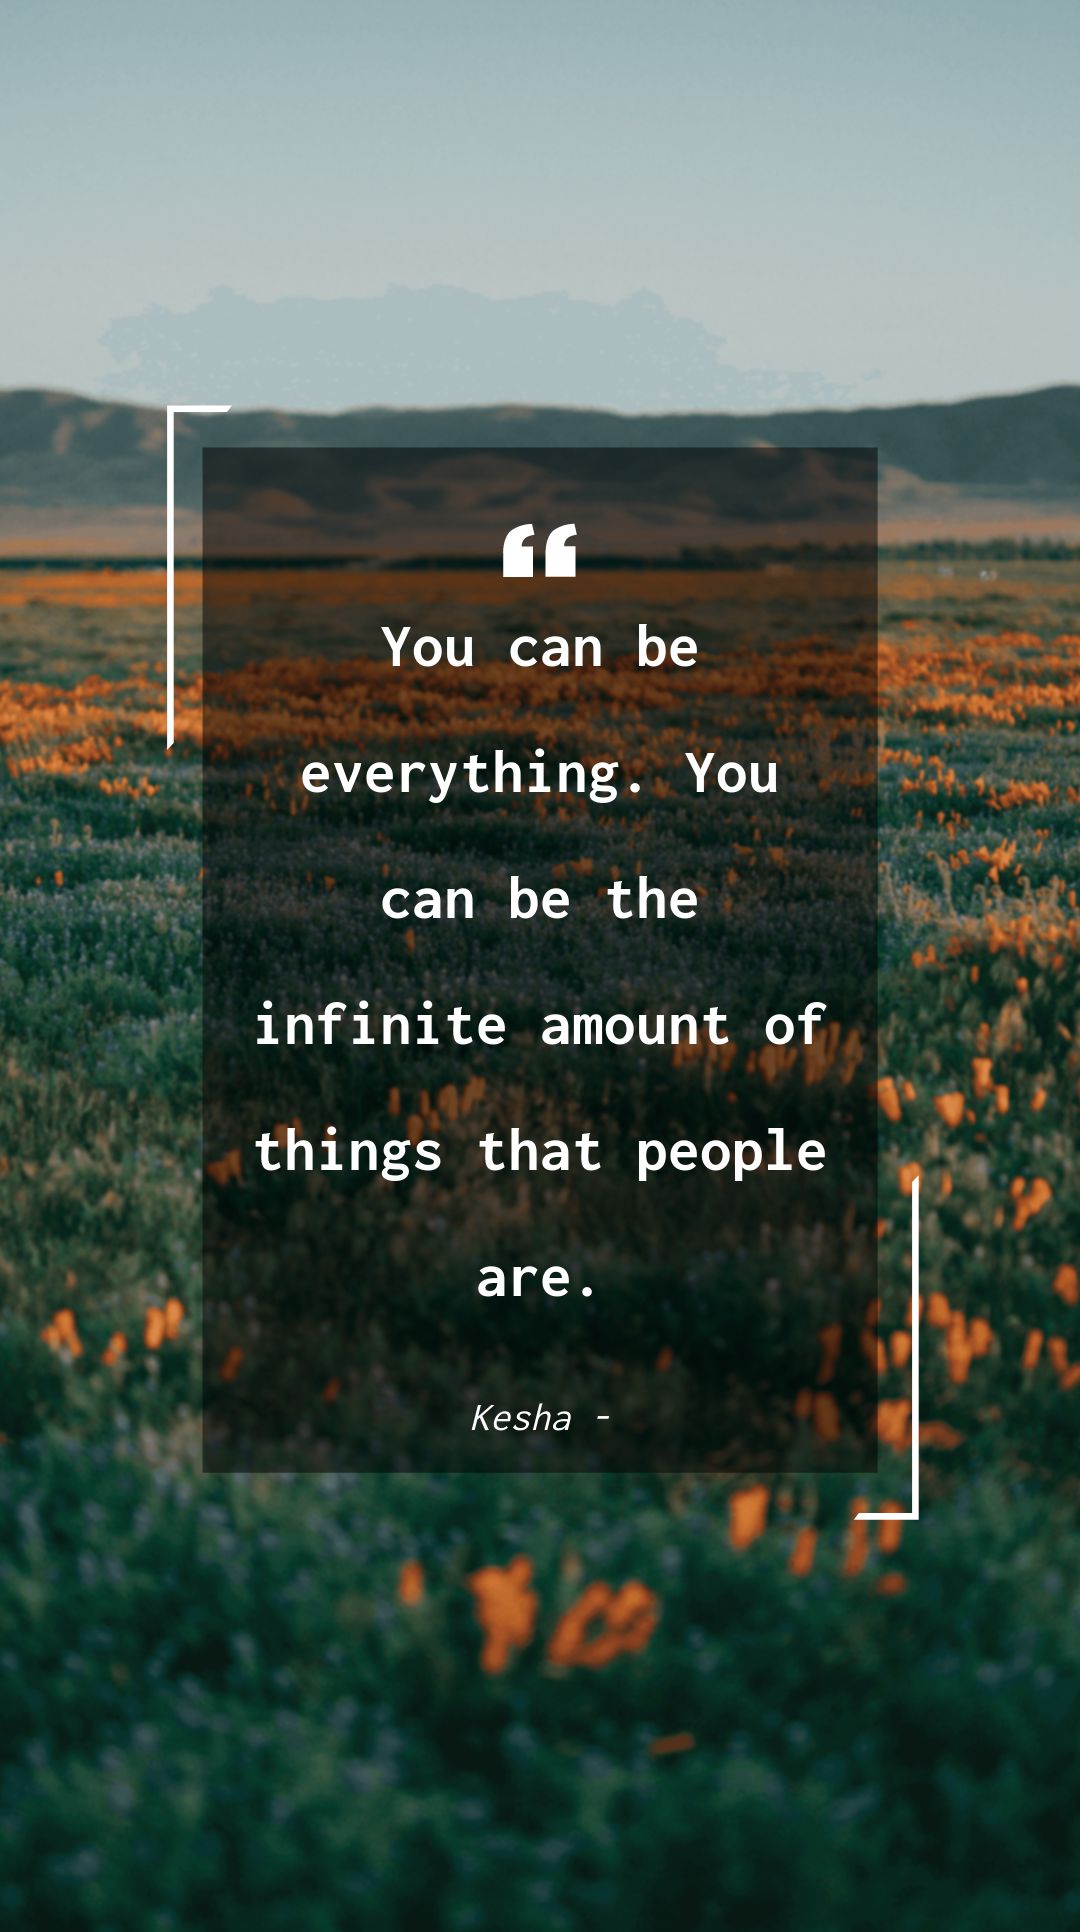 Kesha - You can be everything. You can be the infinite amount of things that people are.